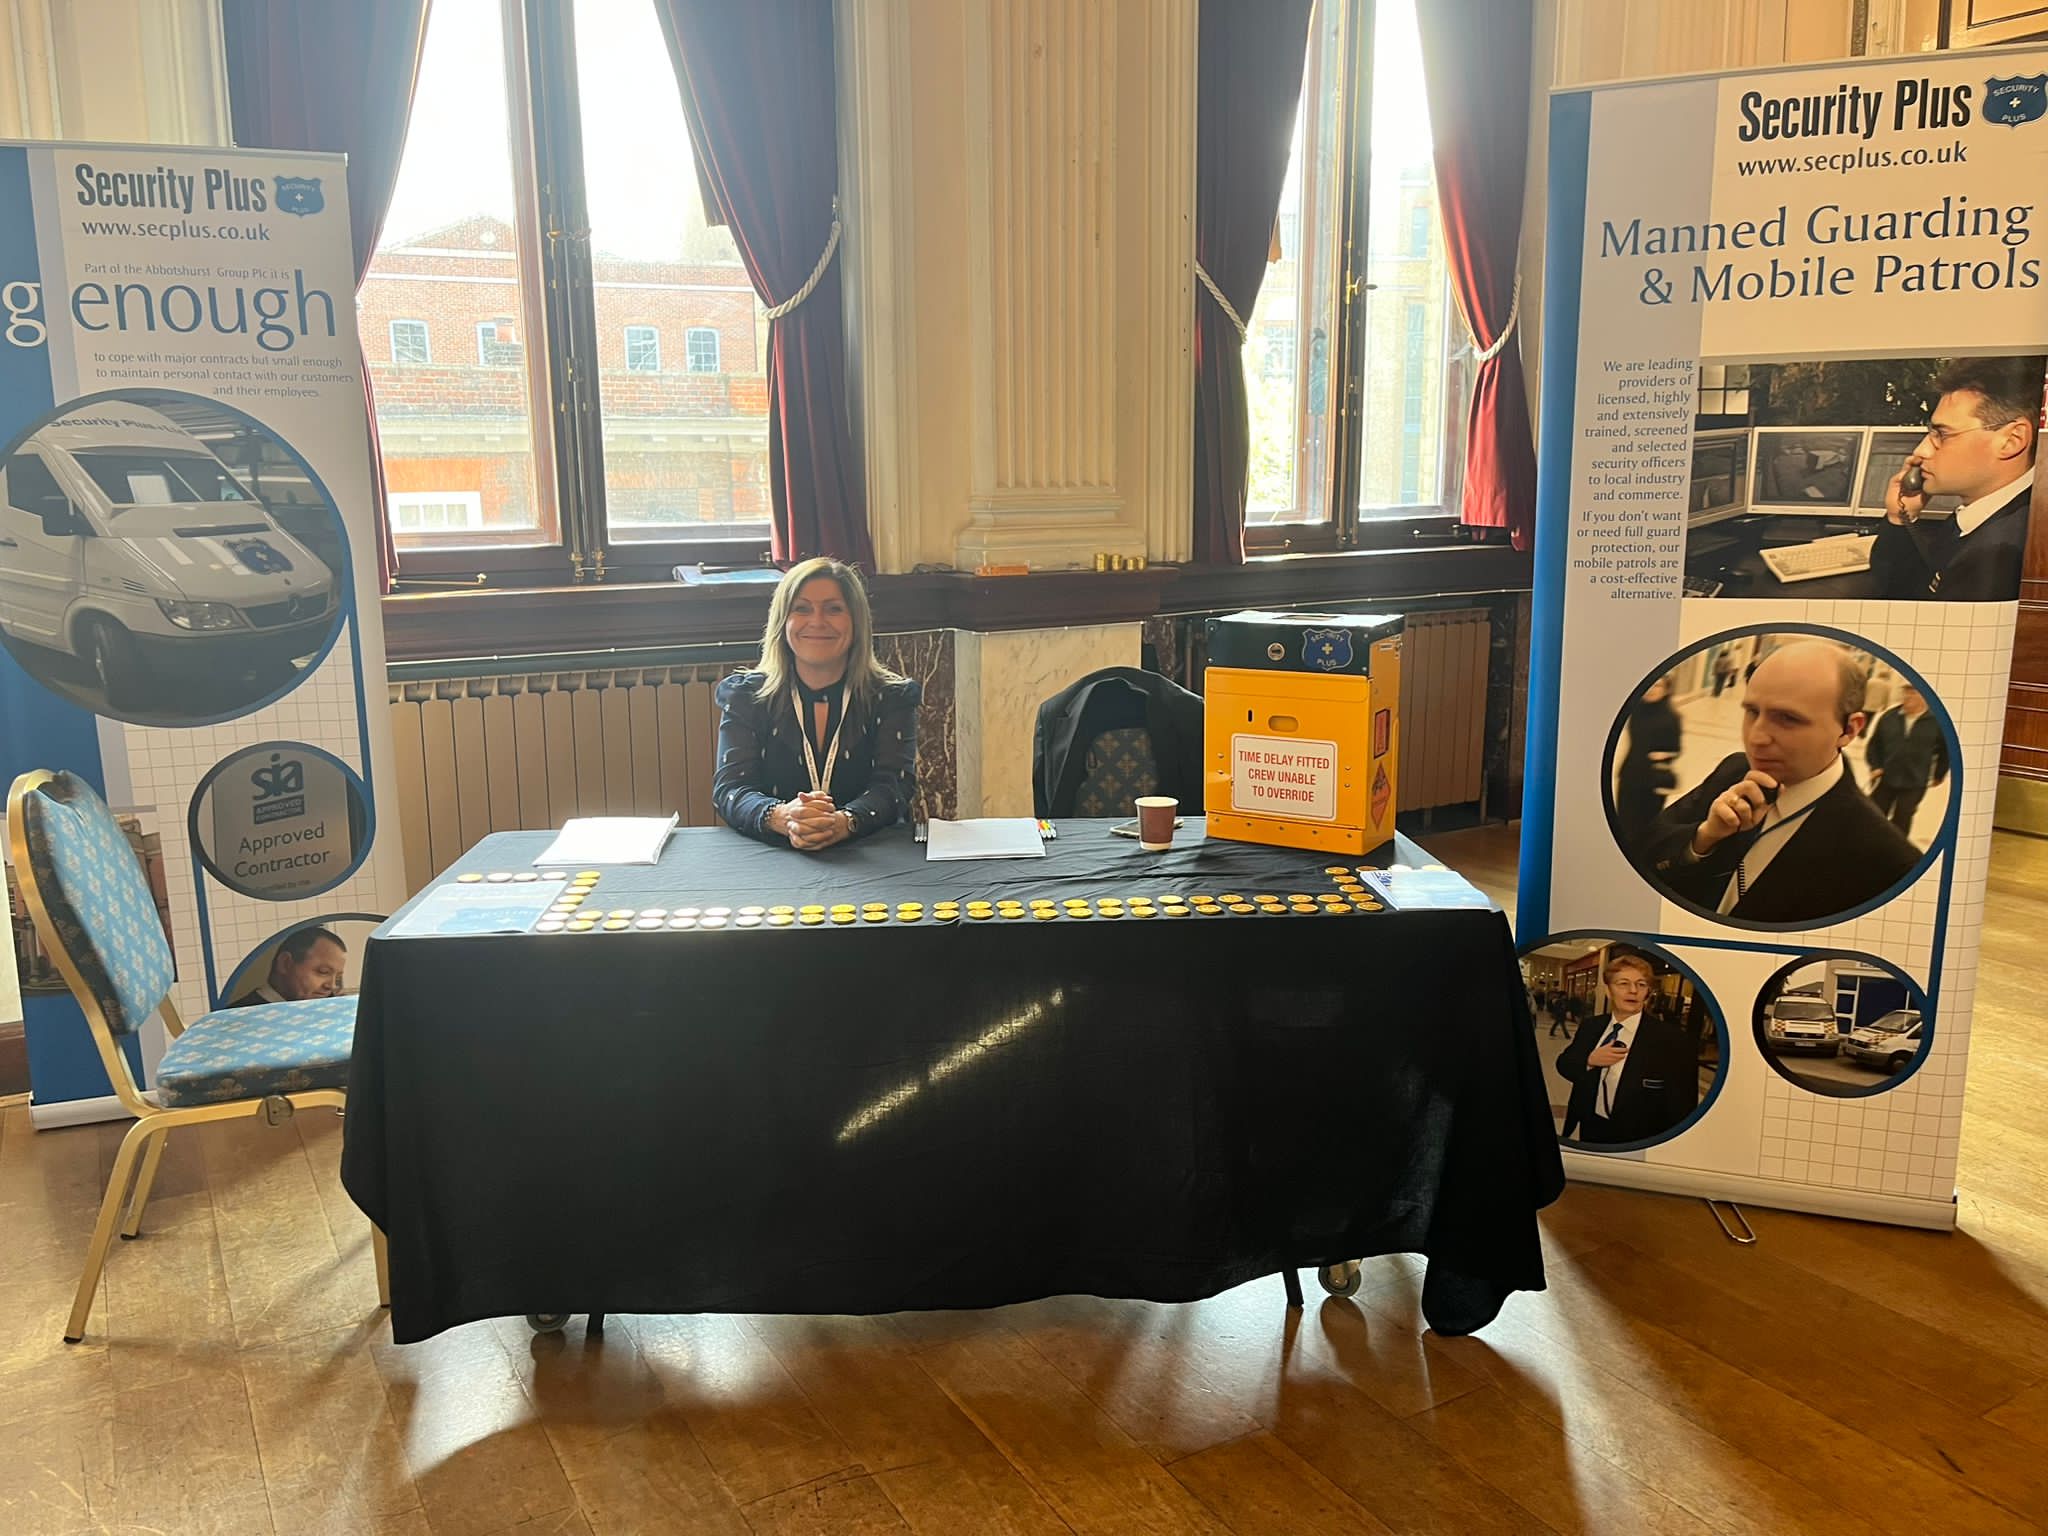 Security Plus at our event in East London